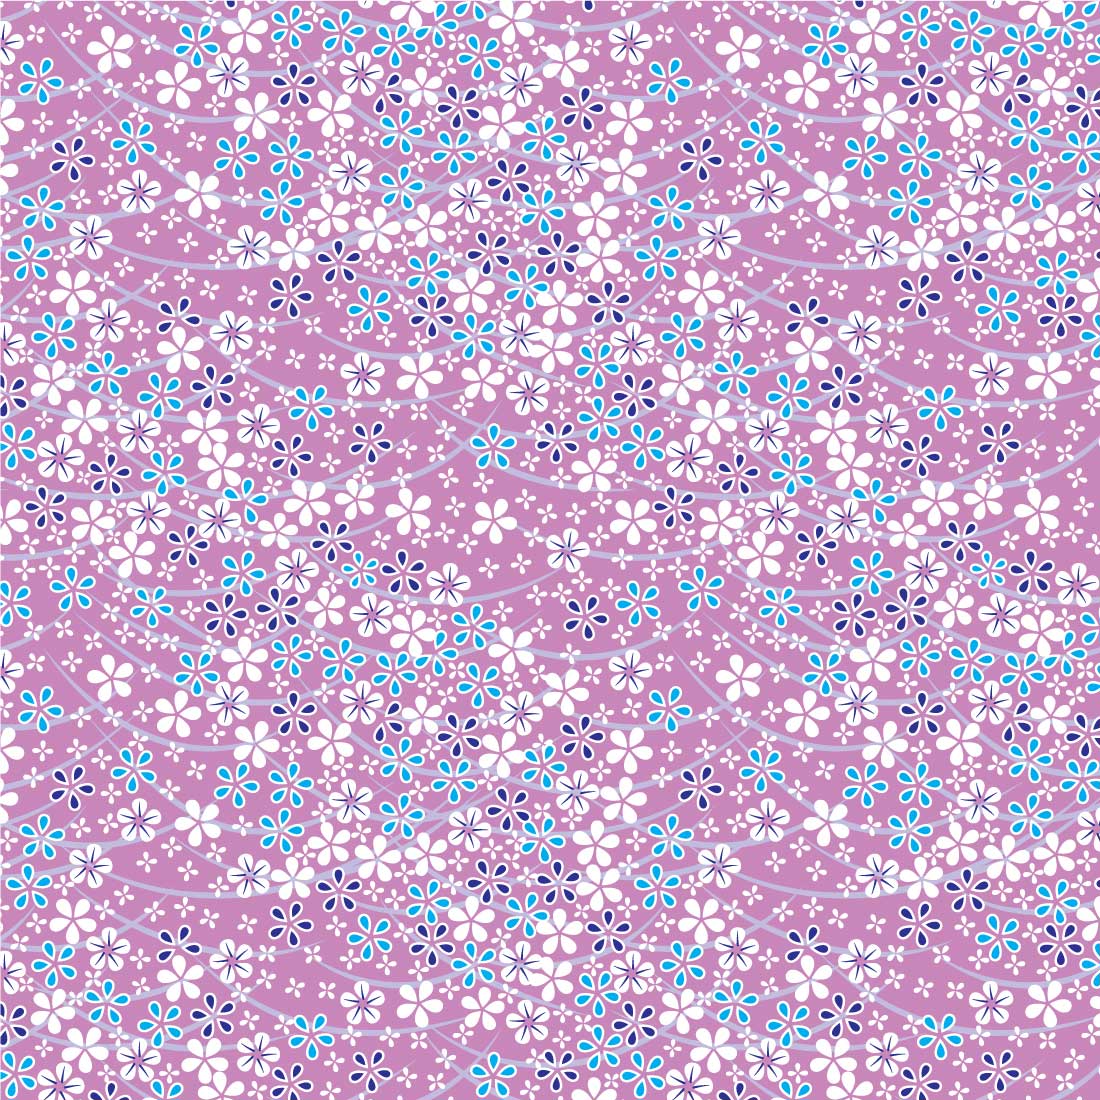 Purple background with blue and white flowers.